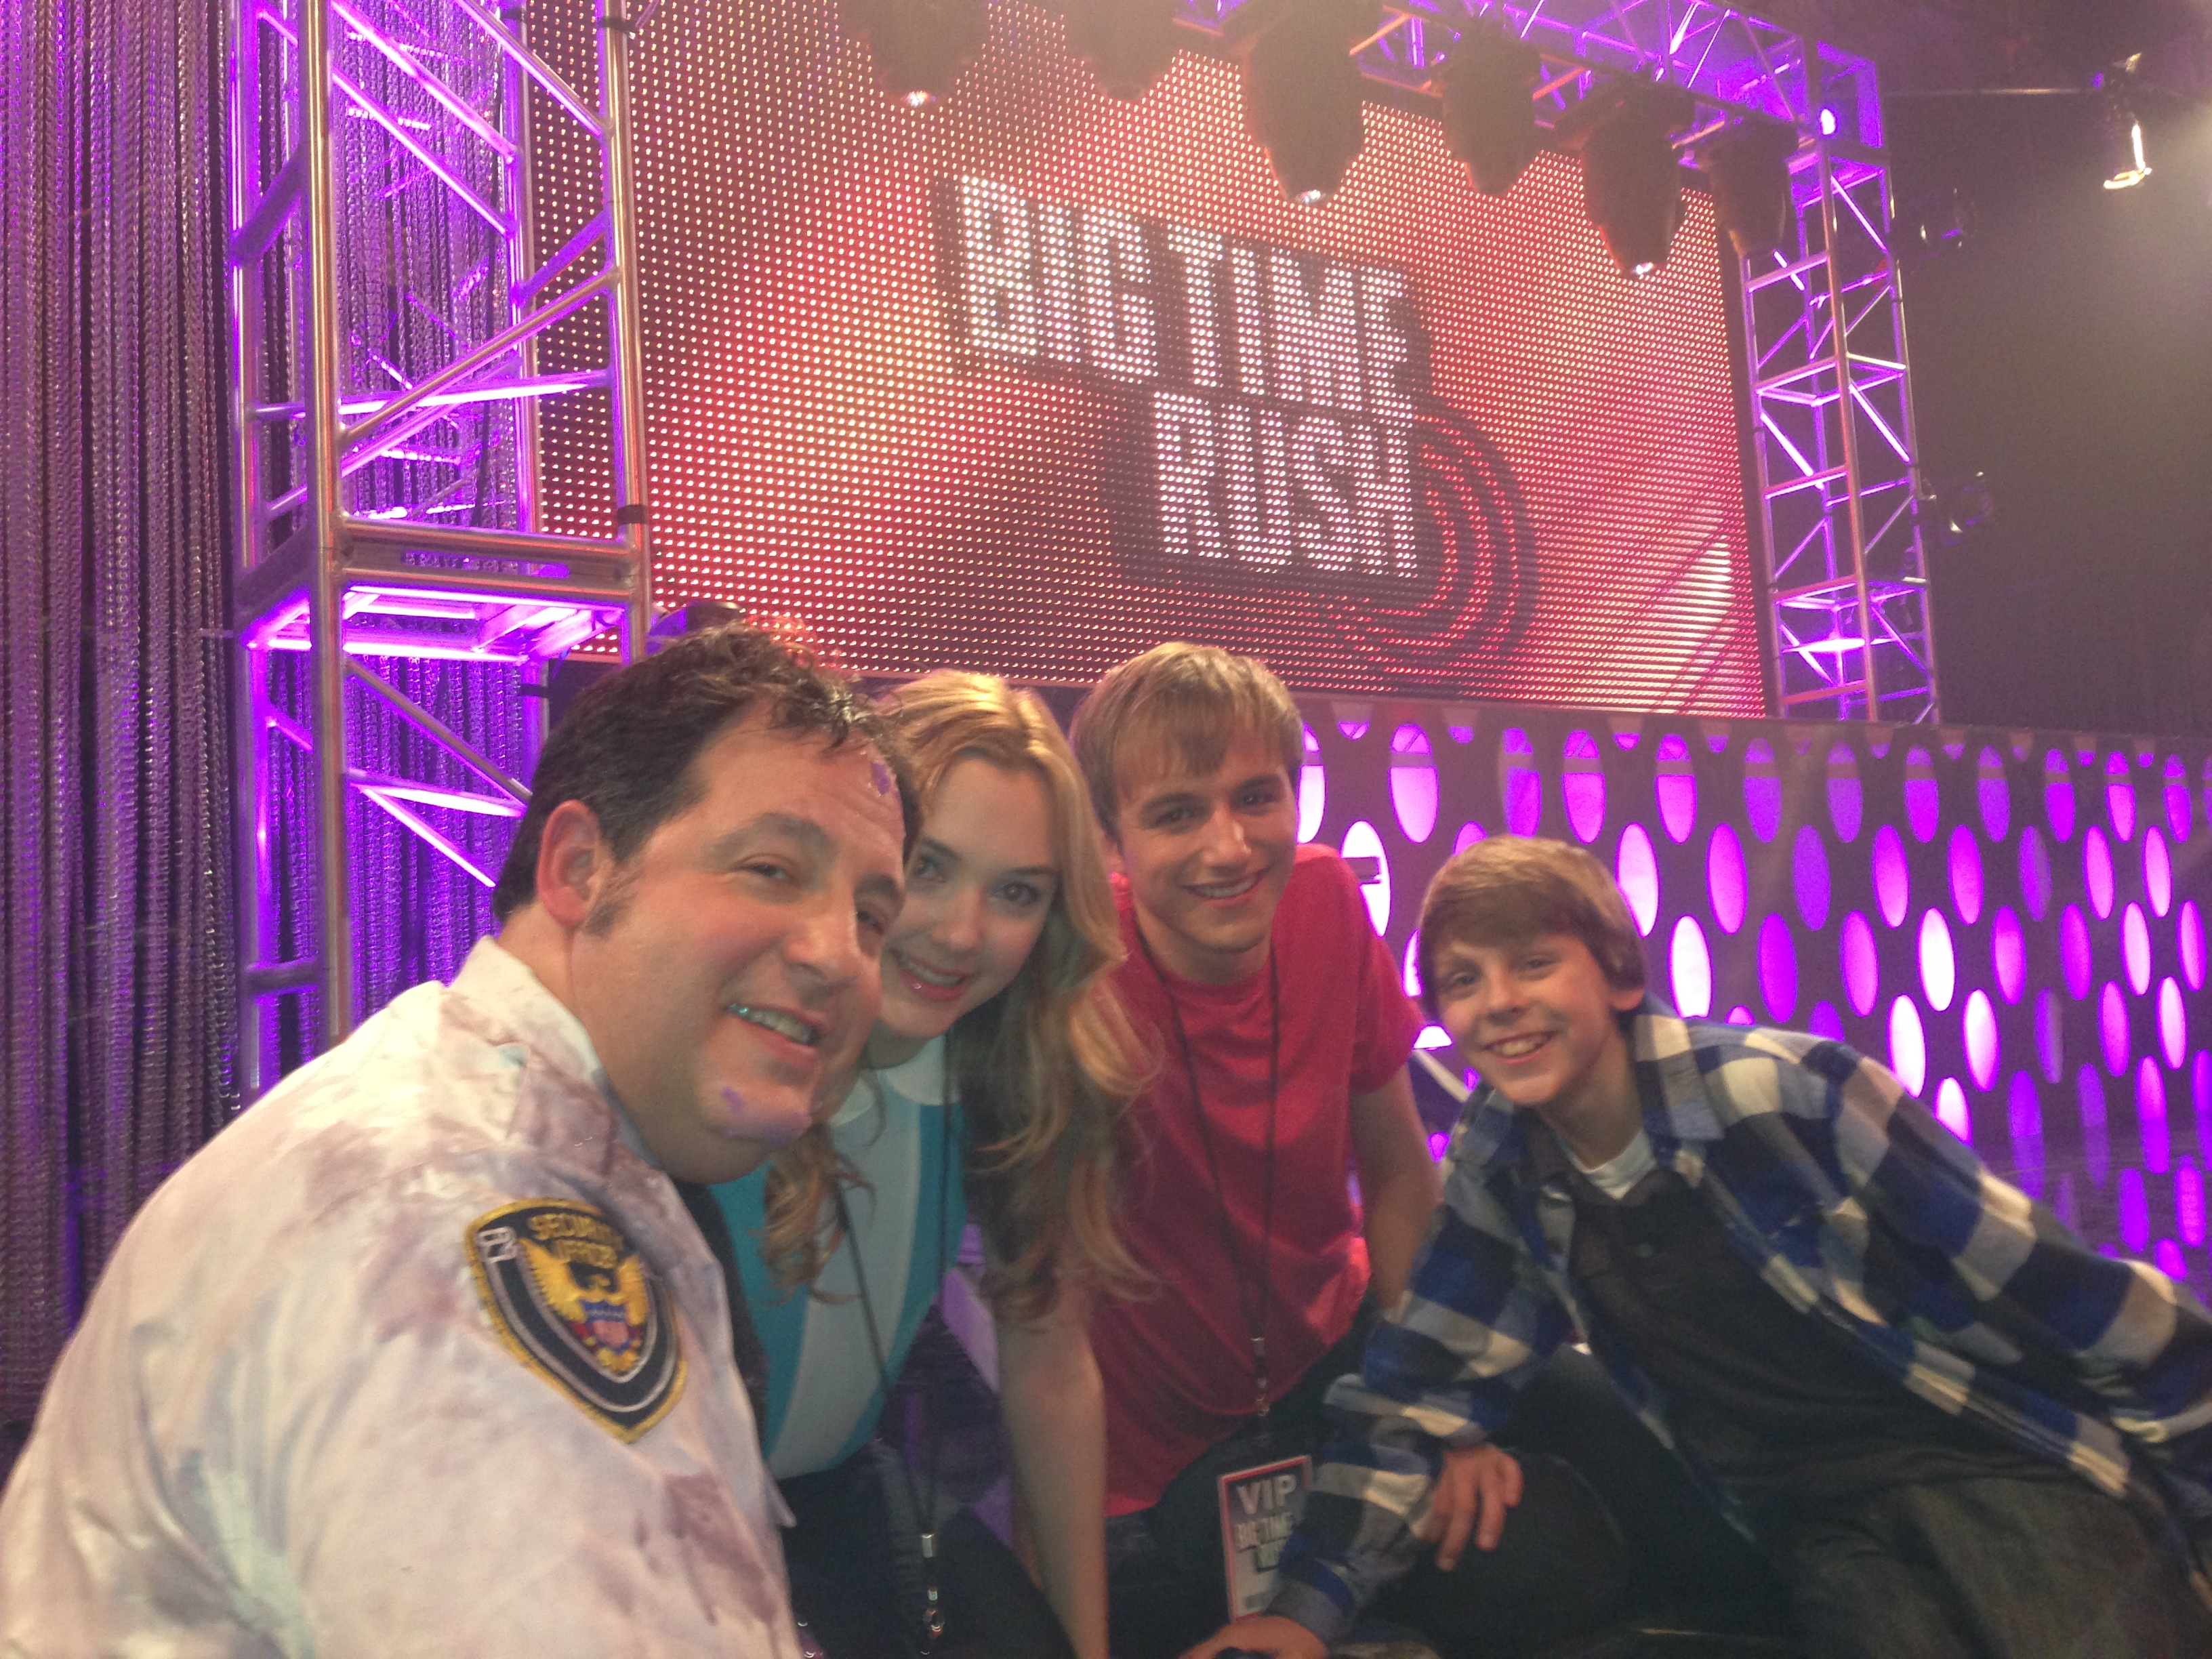 Roger Rignack on set with the cast of Marvin Marvin (Nickelodeon). Playing the Security Guard.